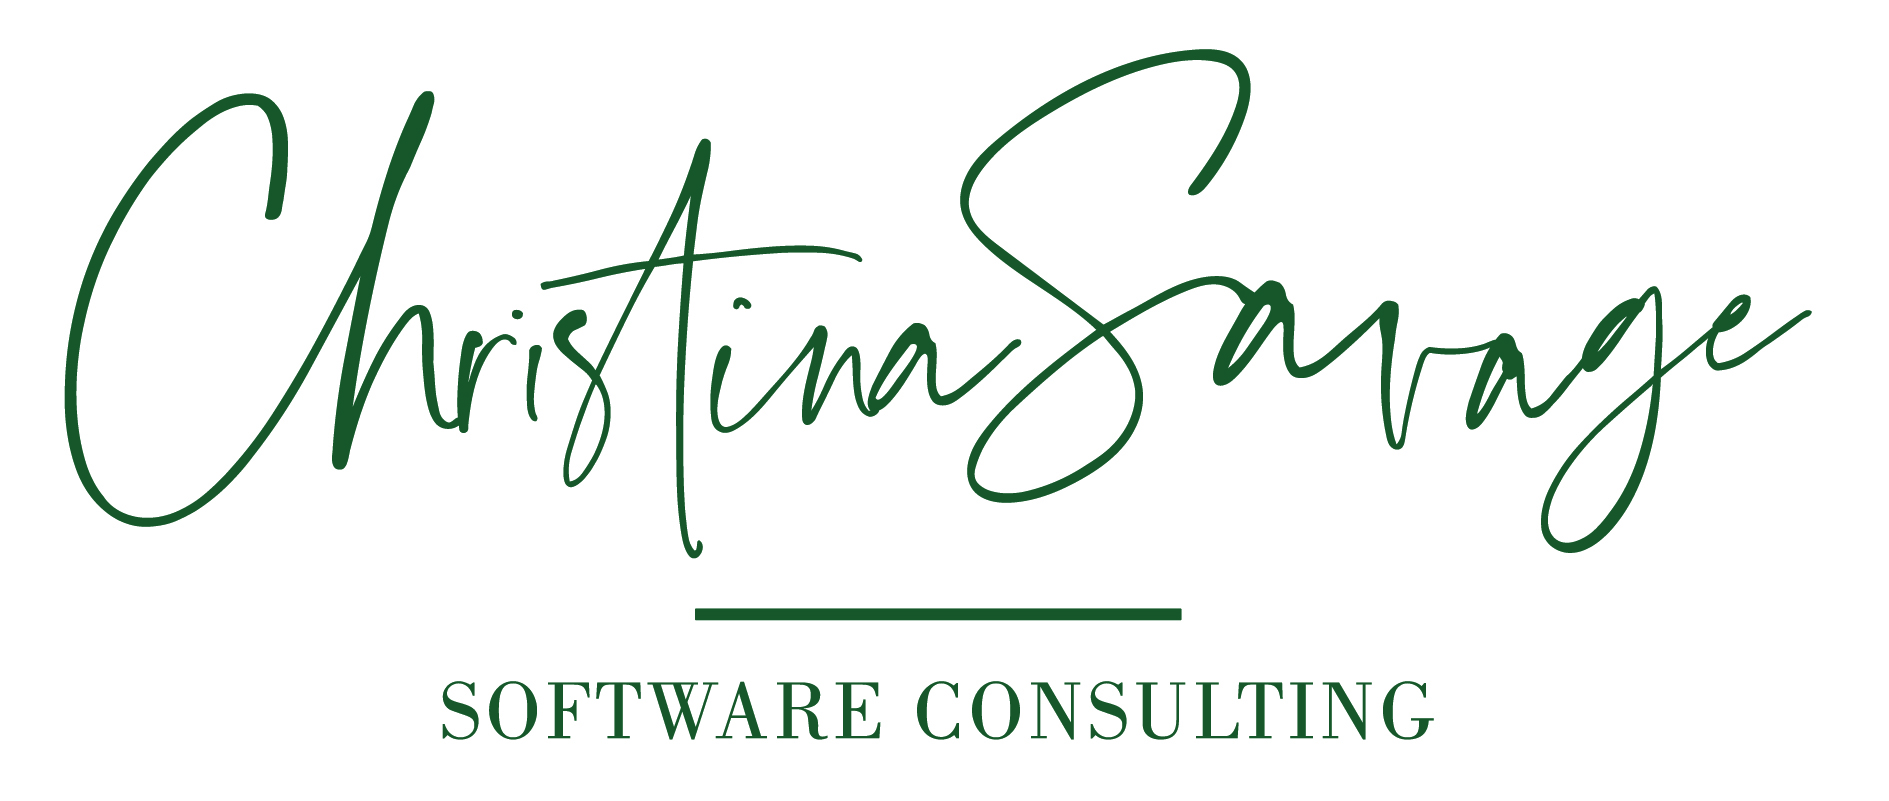 Christina Savage Software Consulting